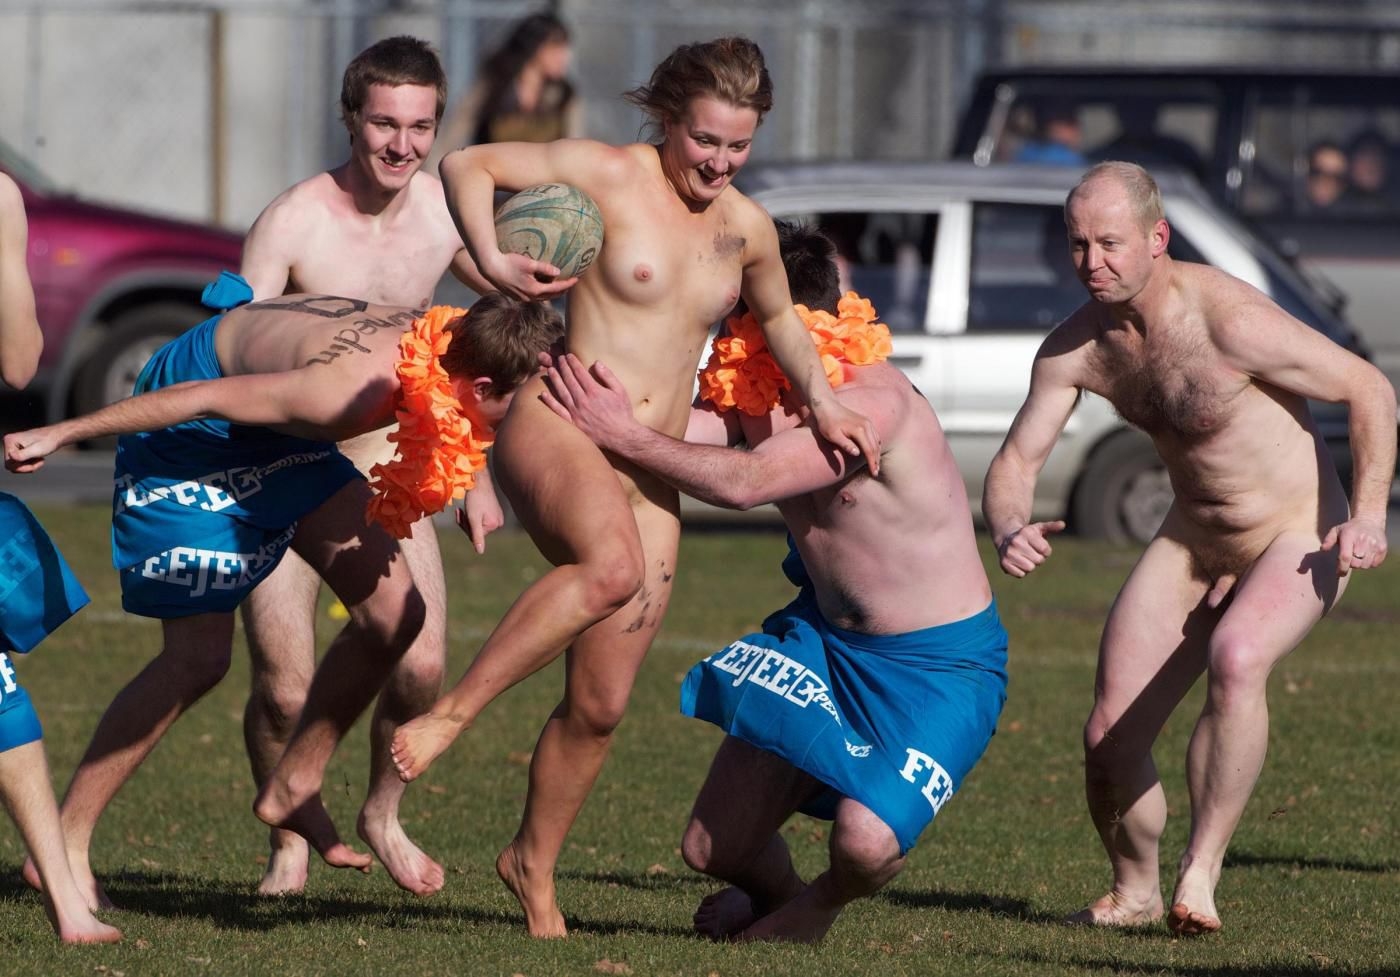 Naked female rugby players